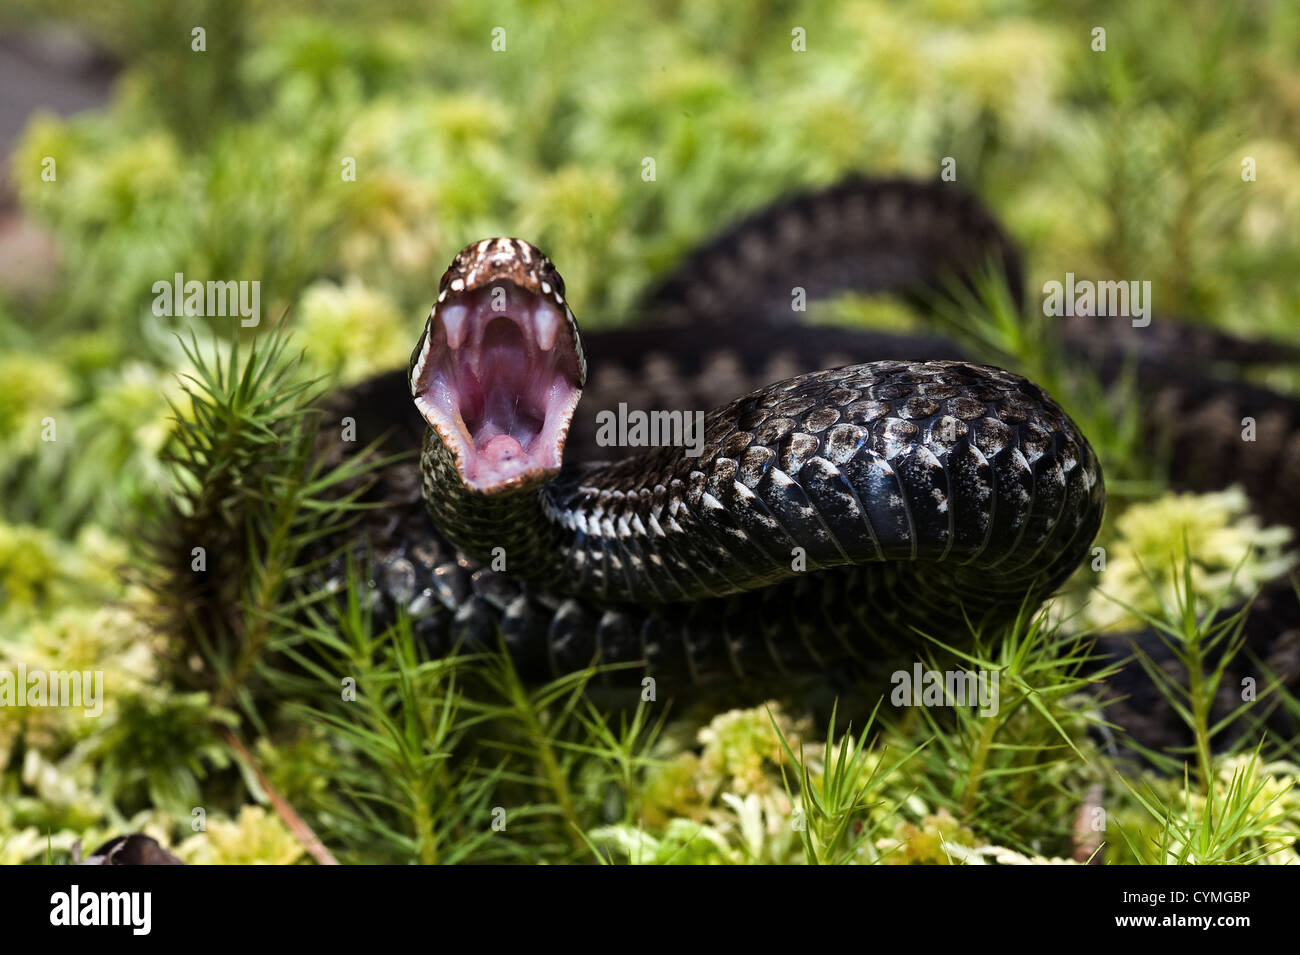 Viper with open mouth Stock Photo